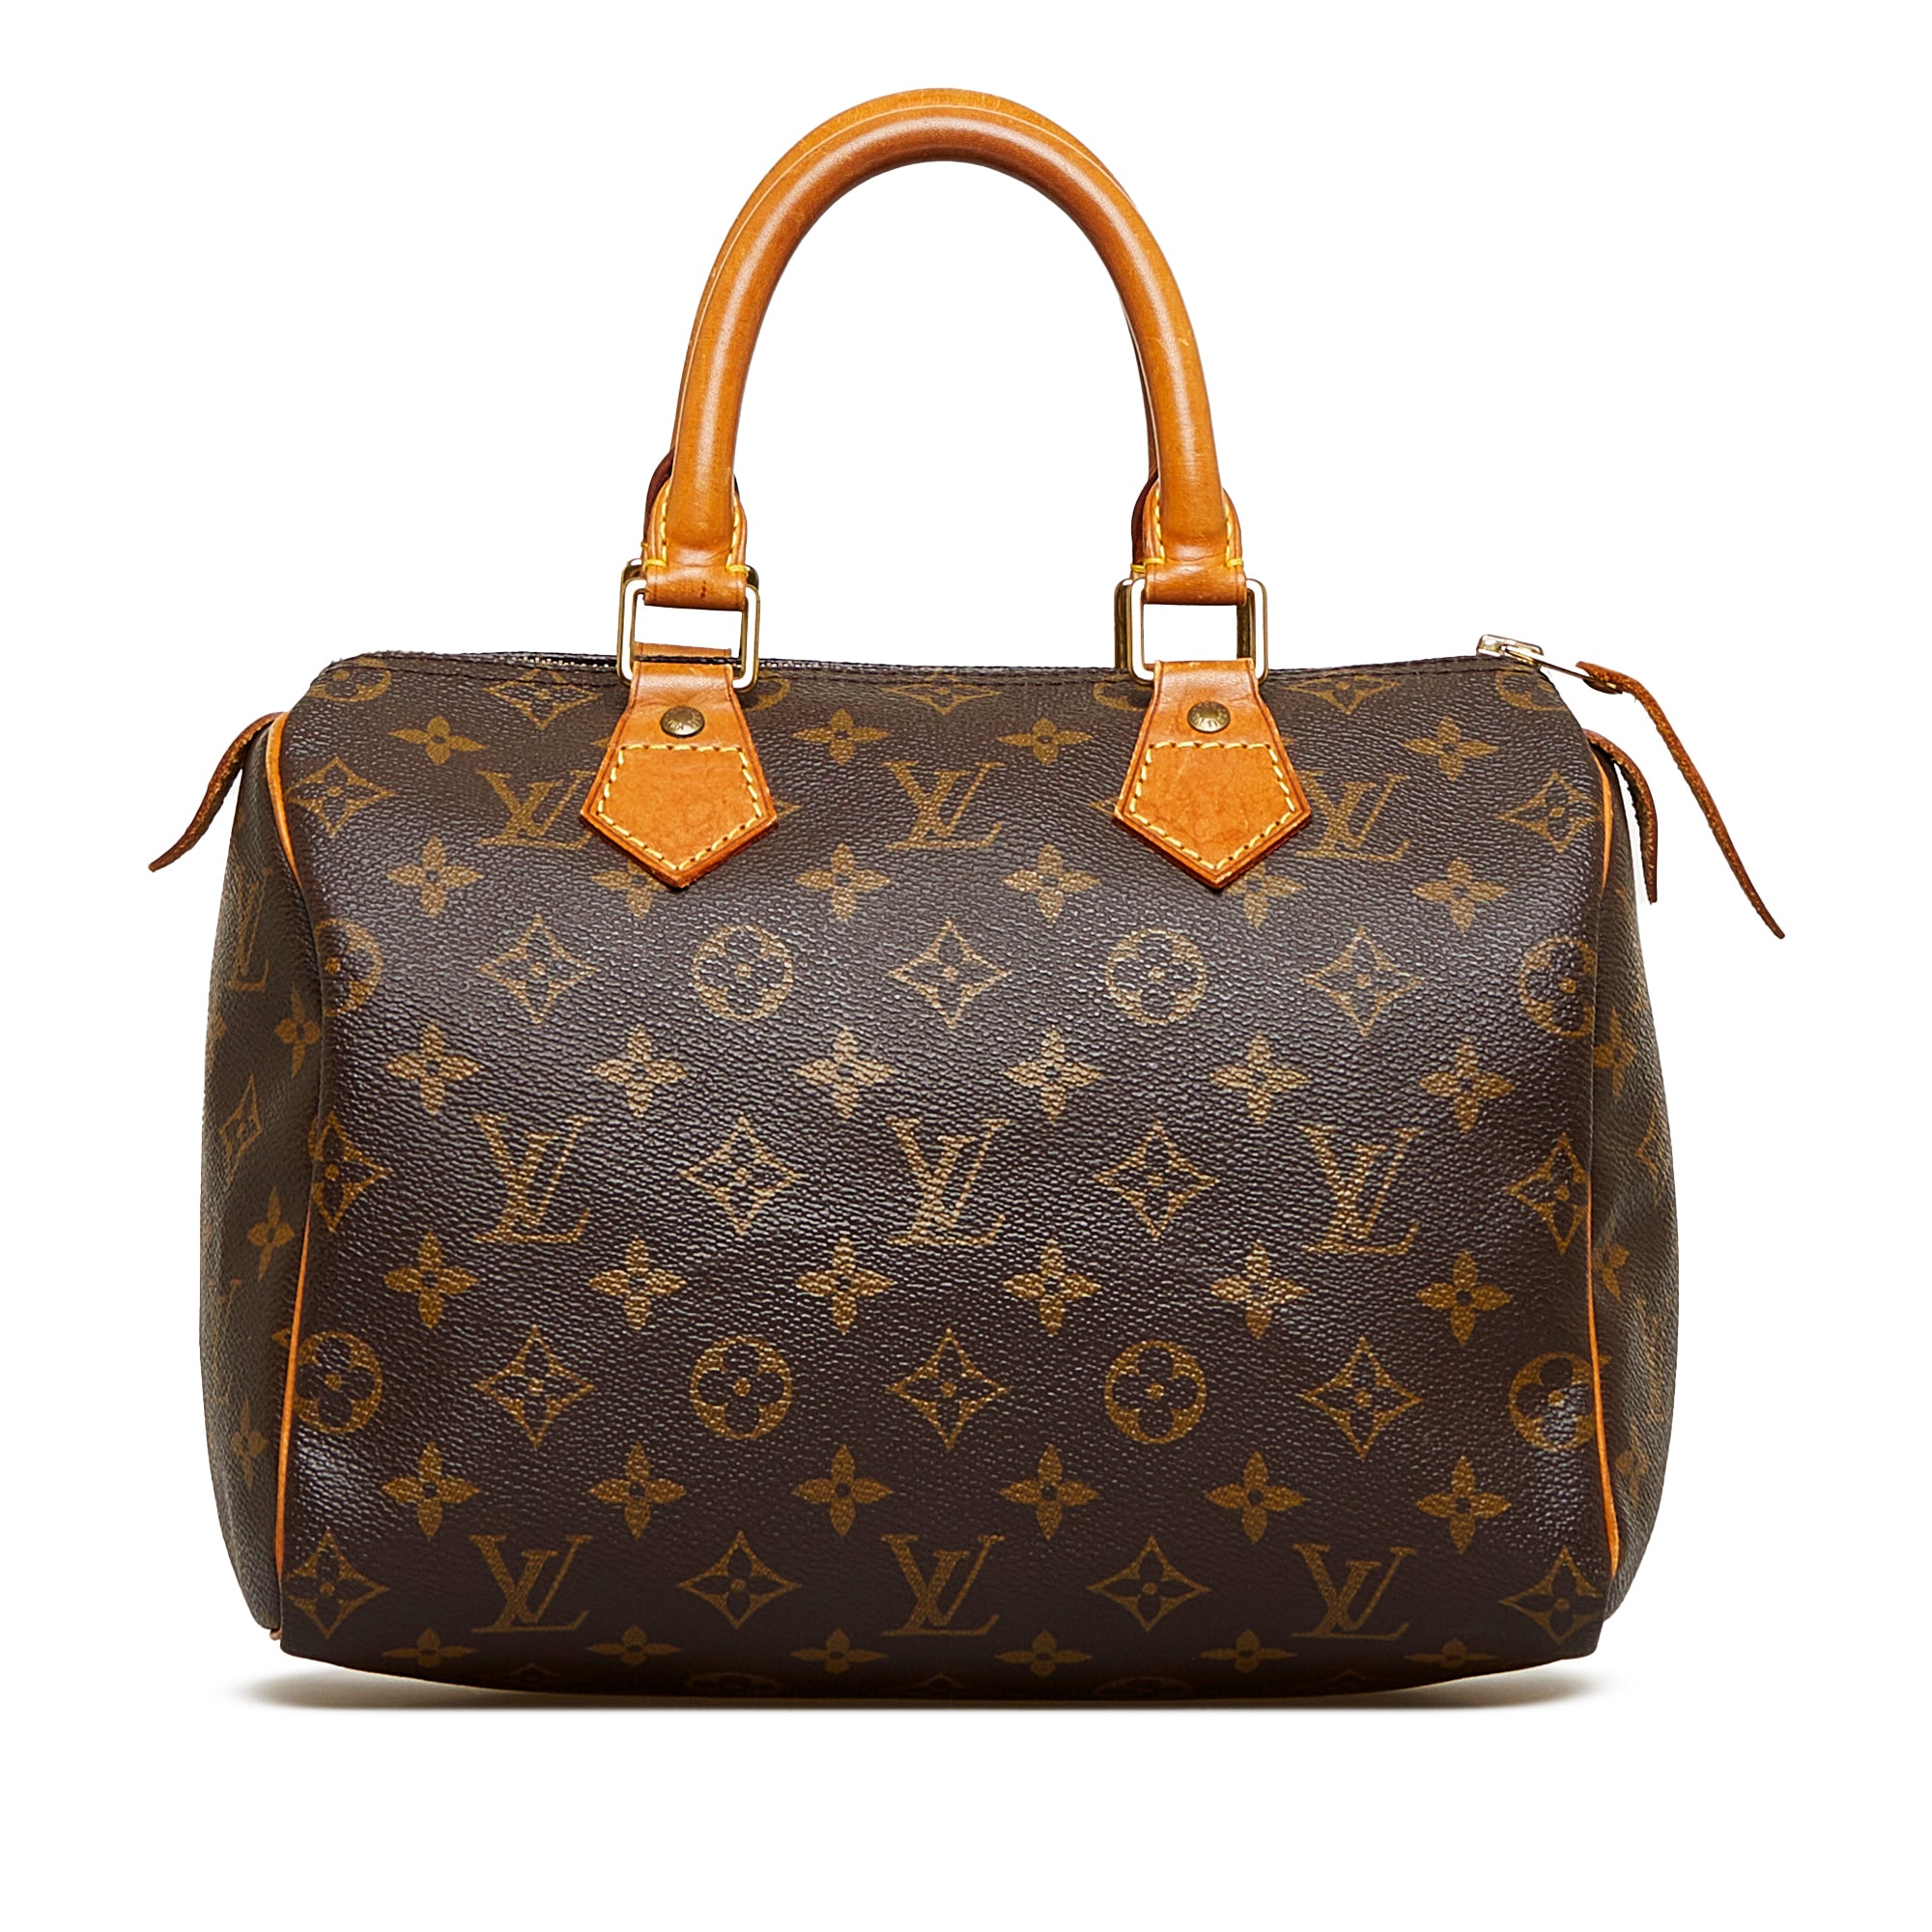 Brown Louis Vuitton Monogram Speedy 25 Boston Bag, Eve Jobs Sharpens Up in  Classic Boots & Crystalized Louis Vuitton Bag at